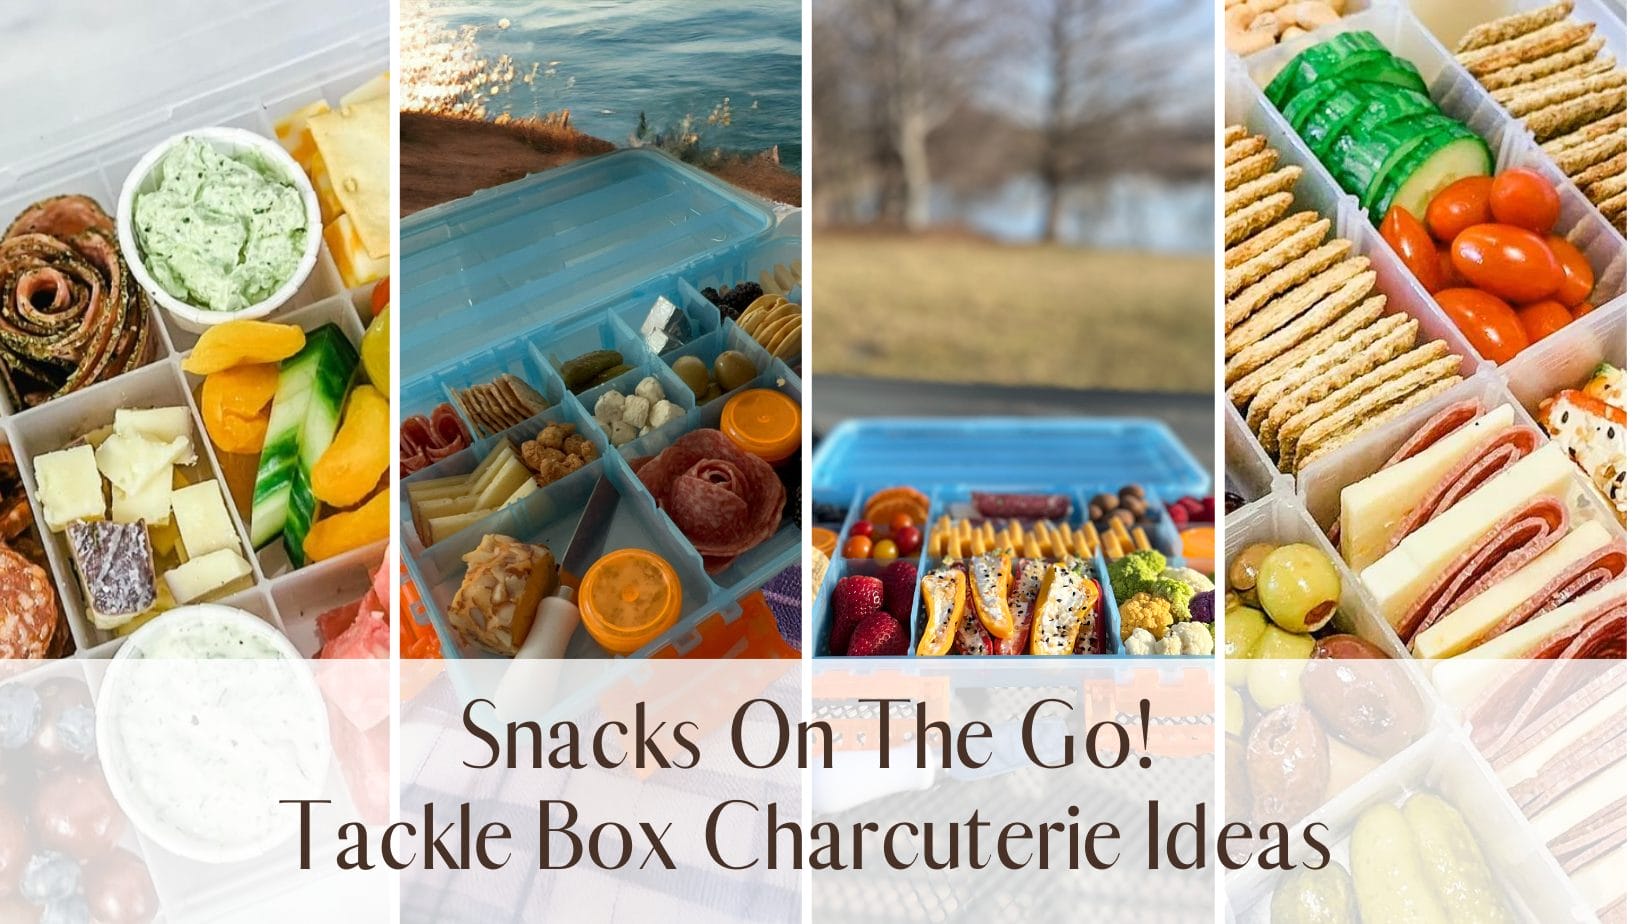 Lets make a Charcuterie Tackle Box! Easy to make and bring on a date